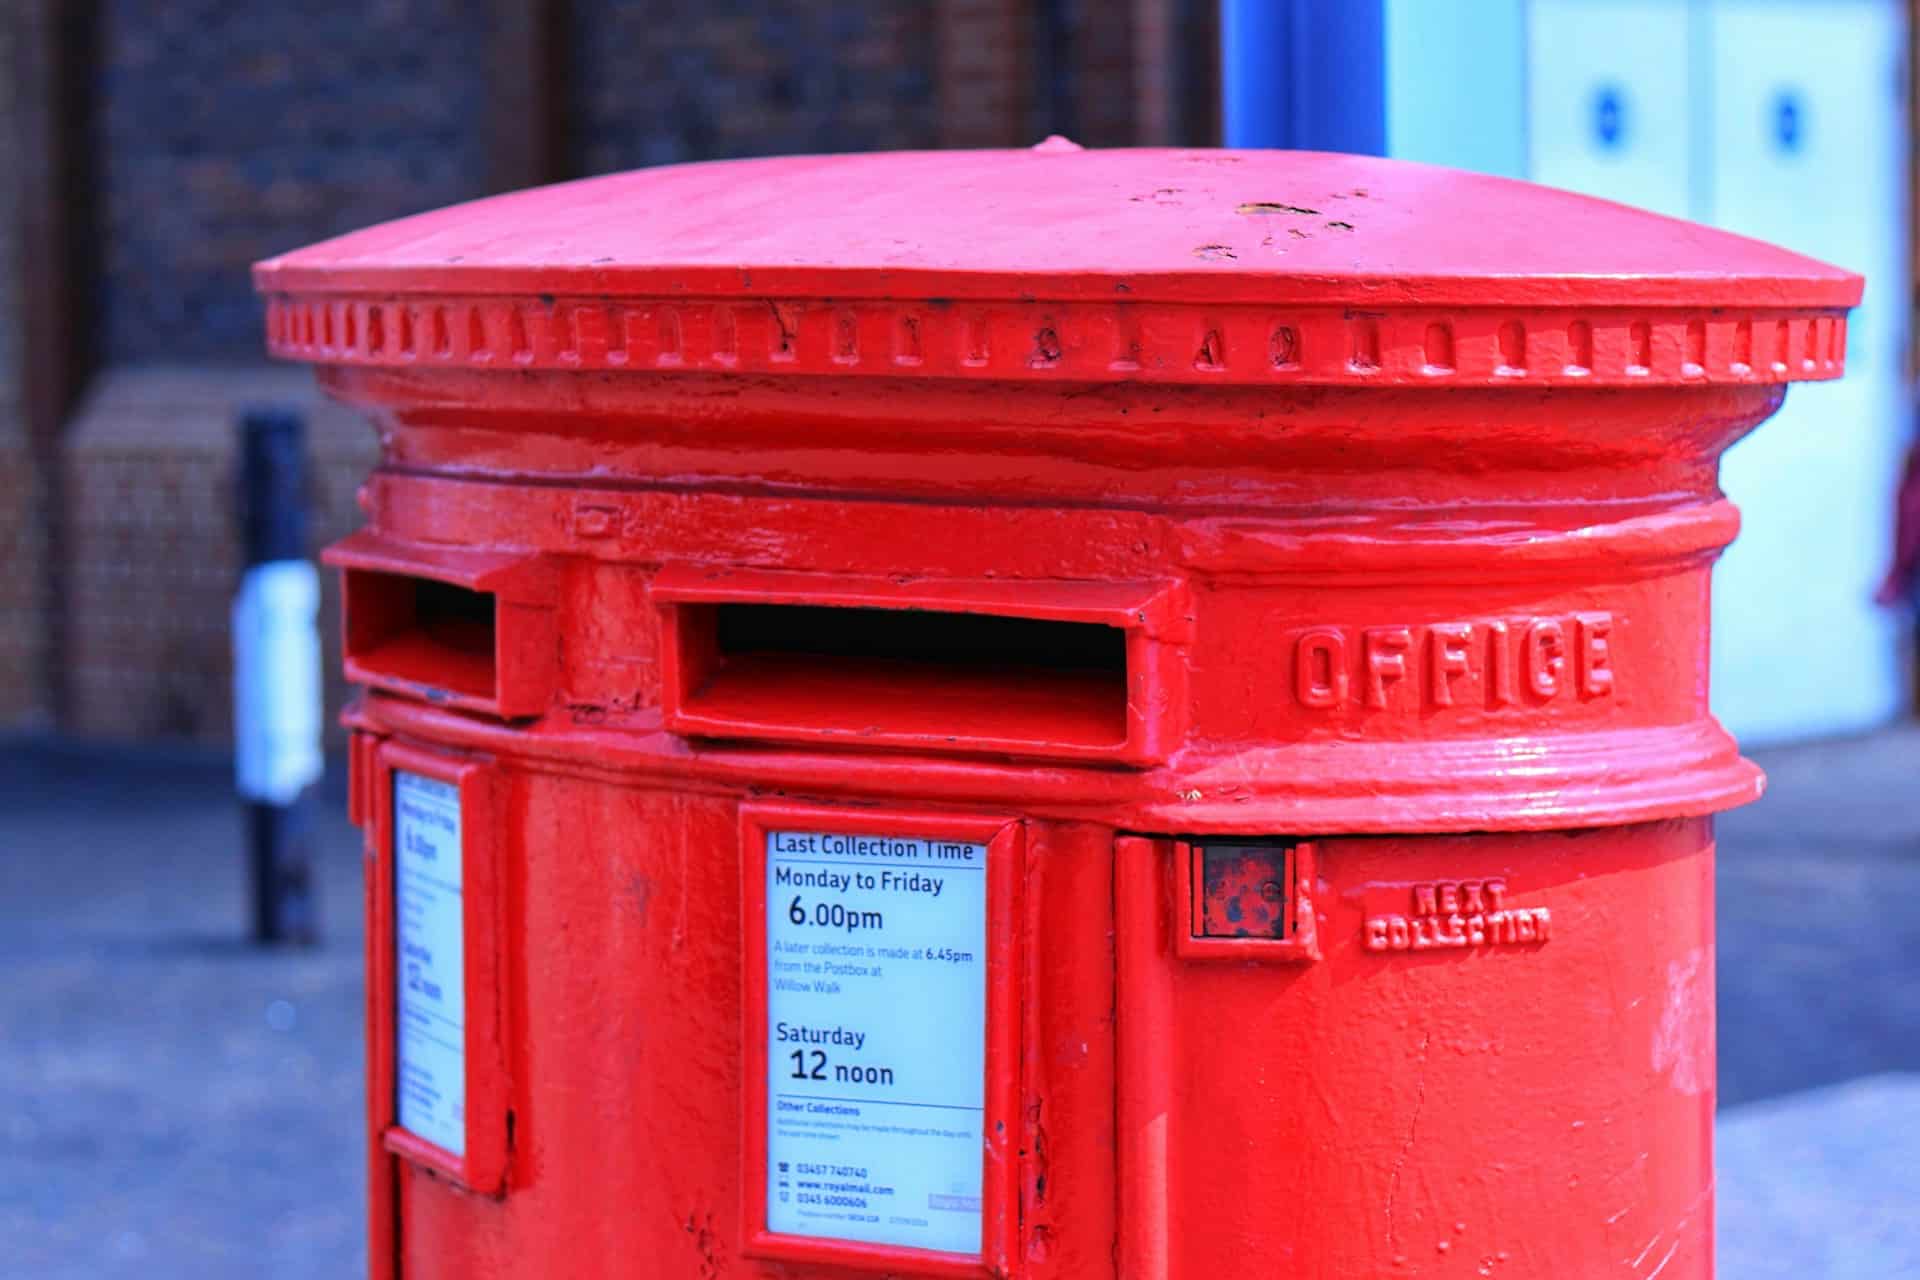 Double red post box by dele oke